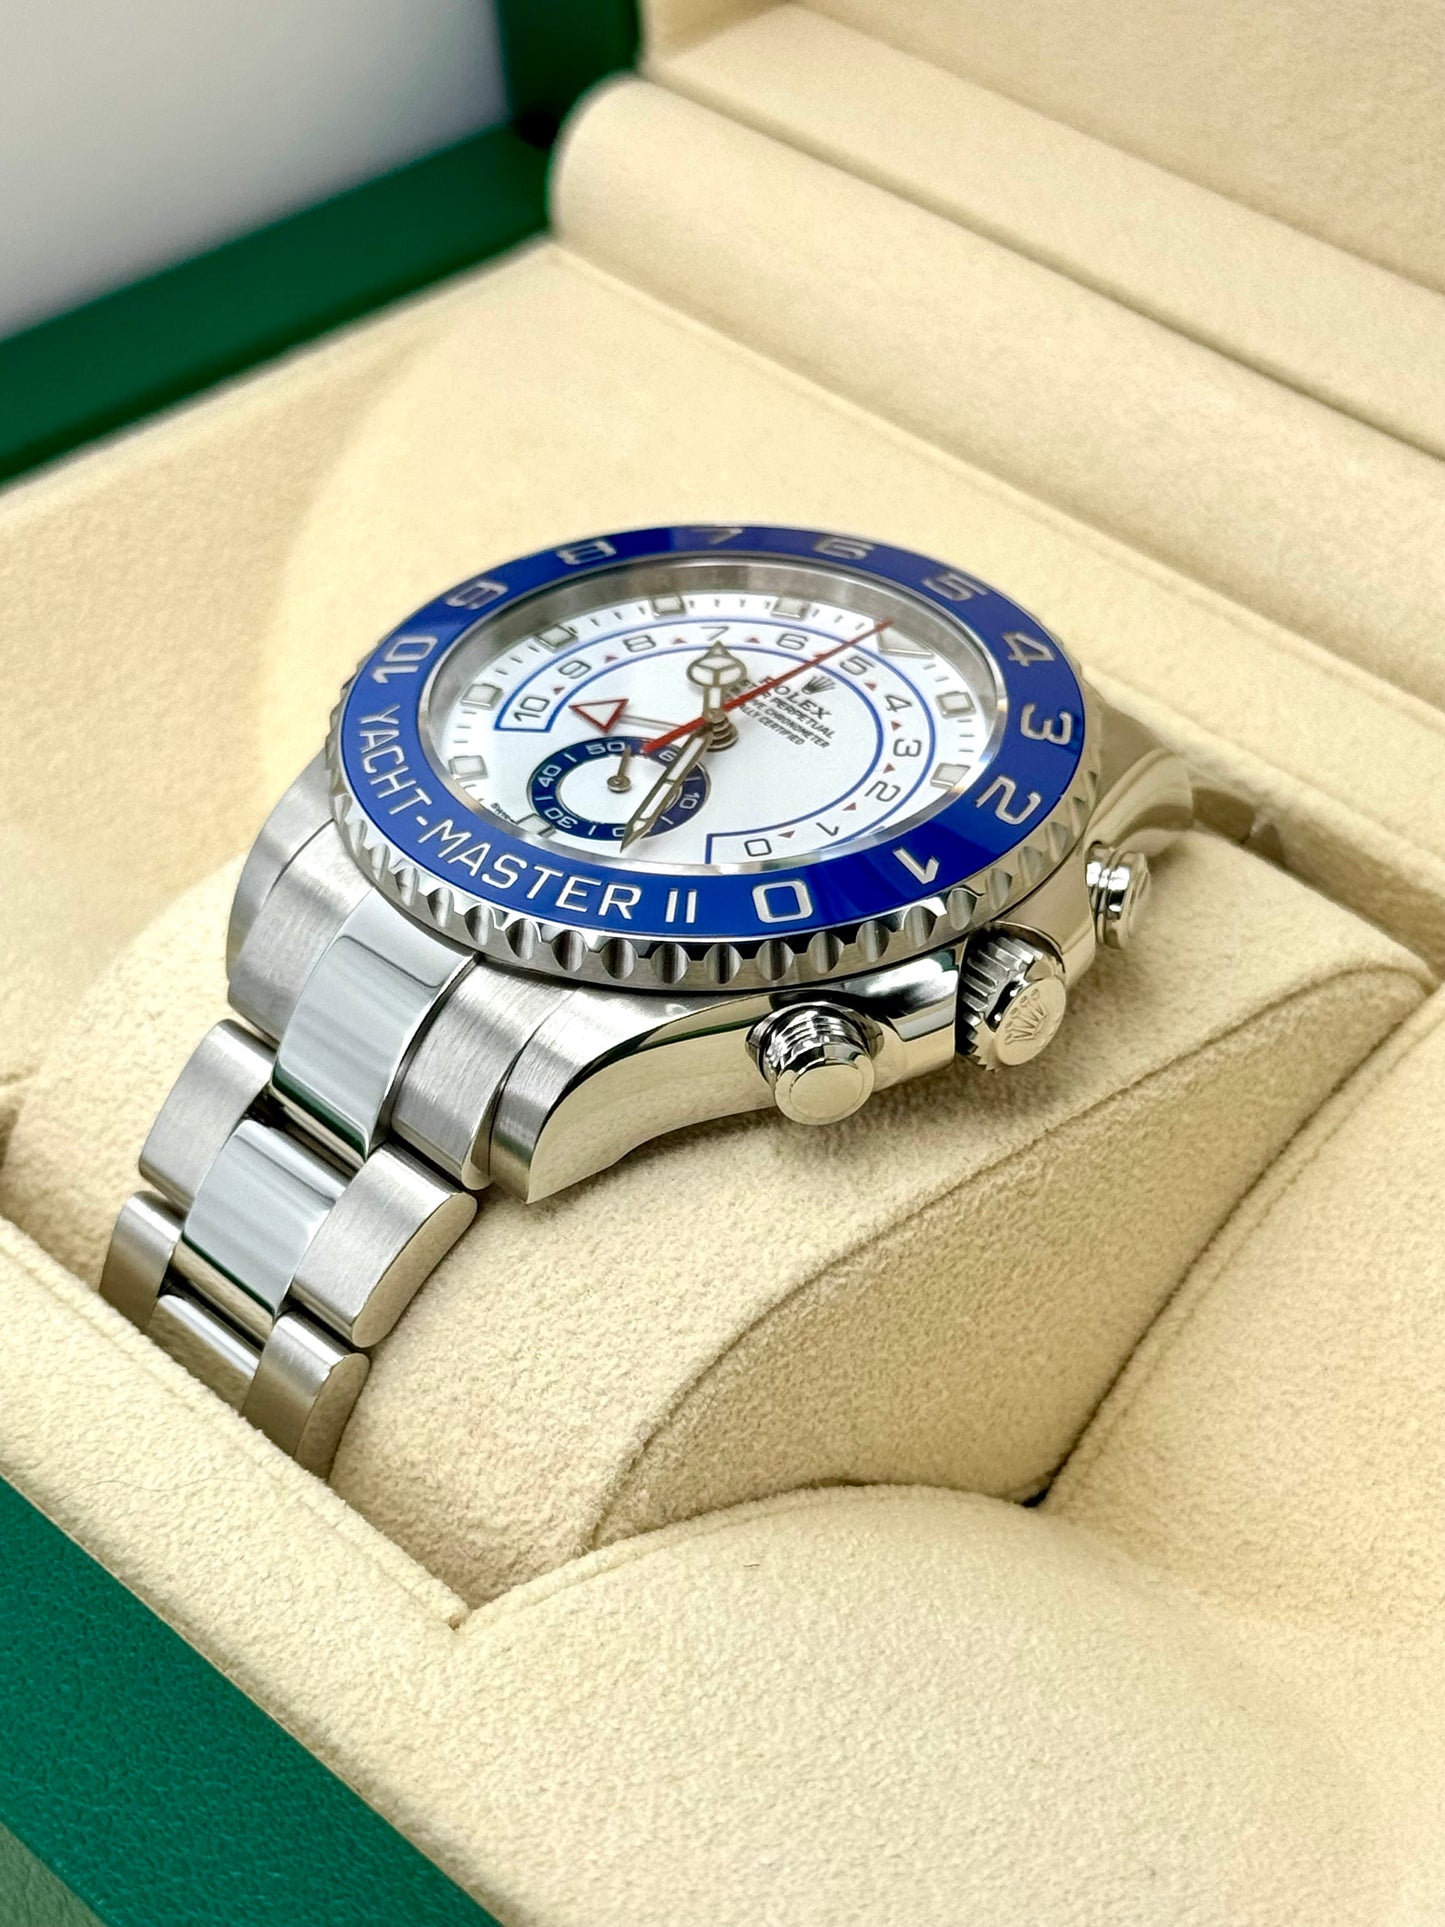 2019 Rolex Yacht-Master II 44mm 116680 Stainless Steel White Dial - MyWatchLLC